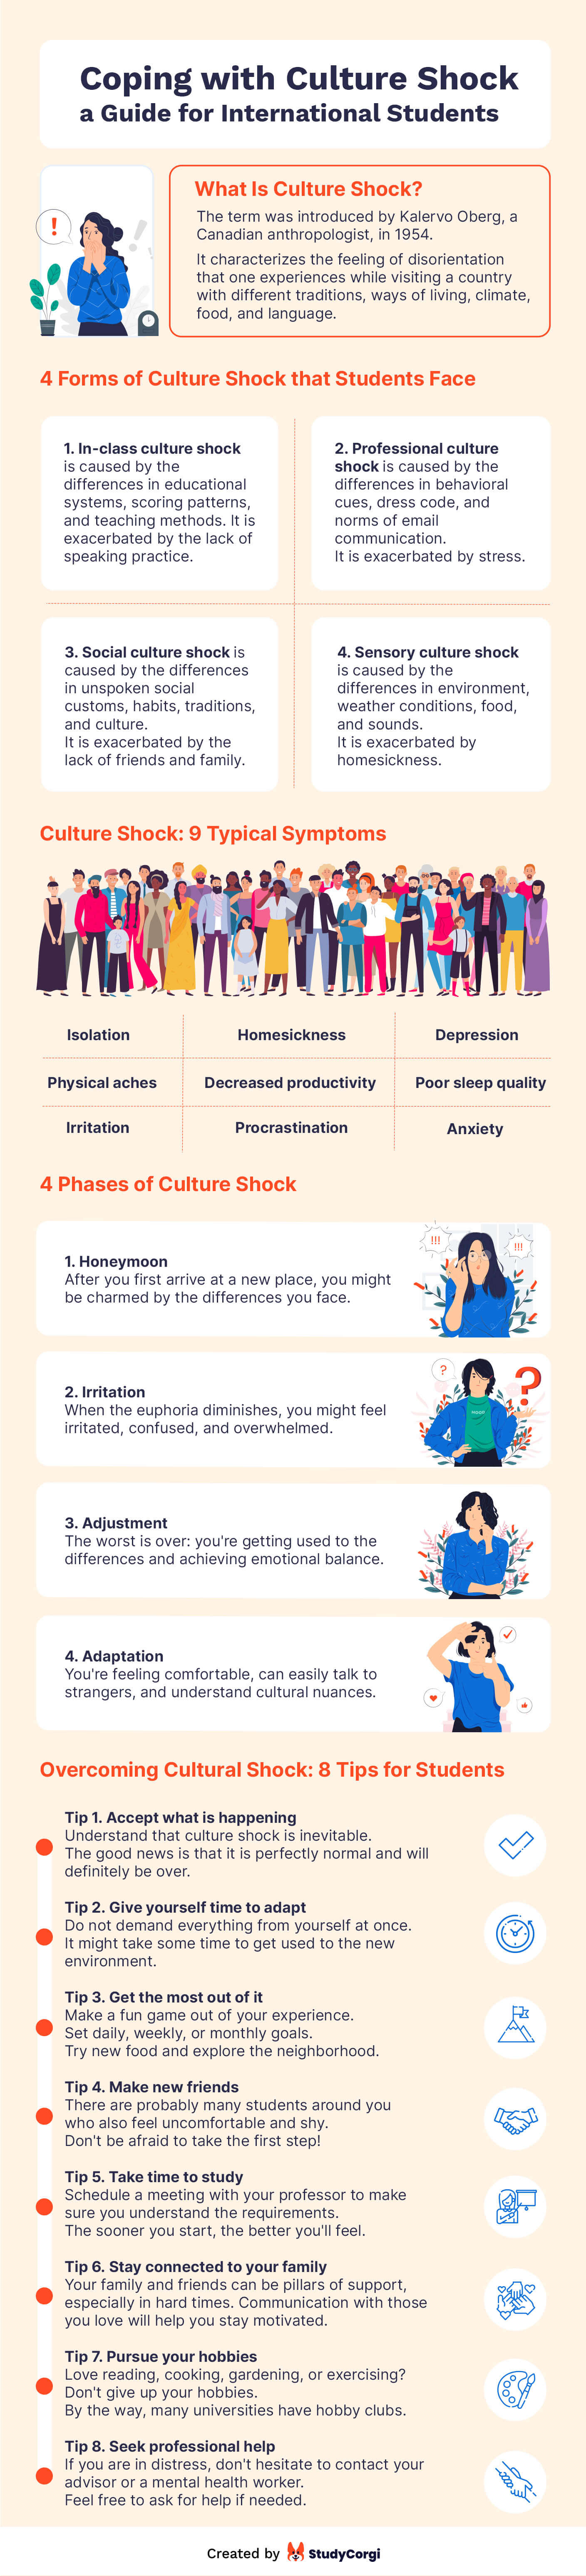 The infographic contains a definition and symptoms of culture shock, and 8 effective tips on how to cope with it.